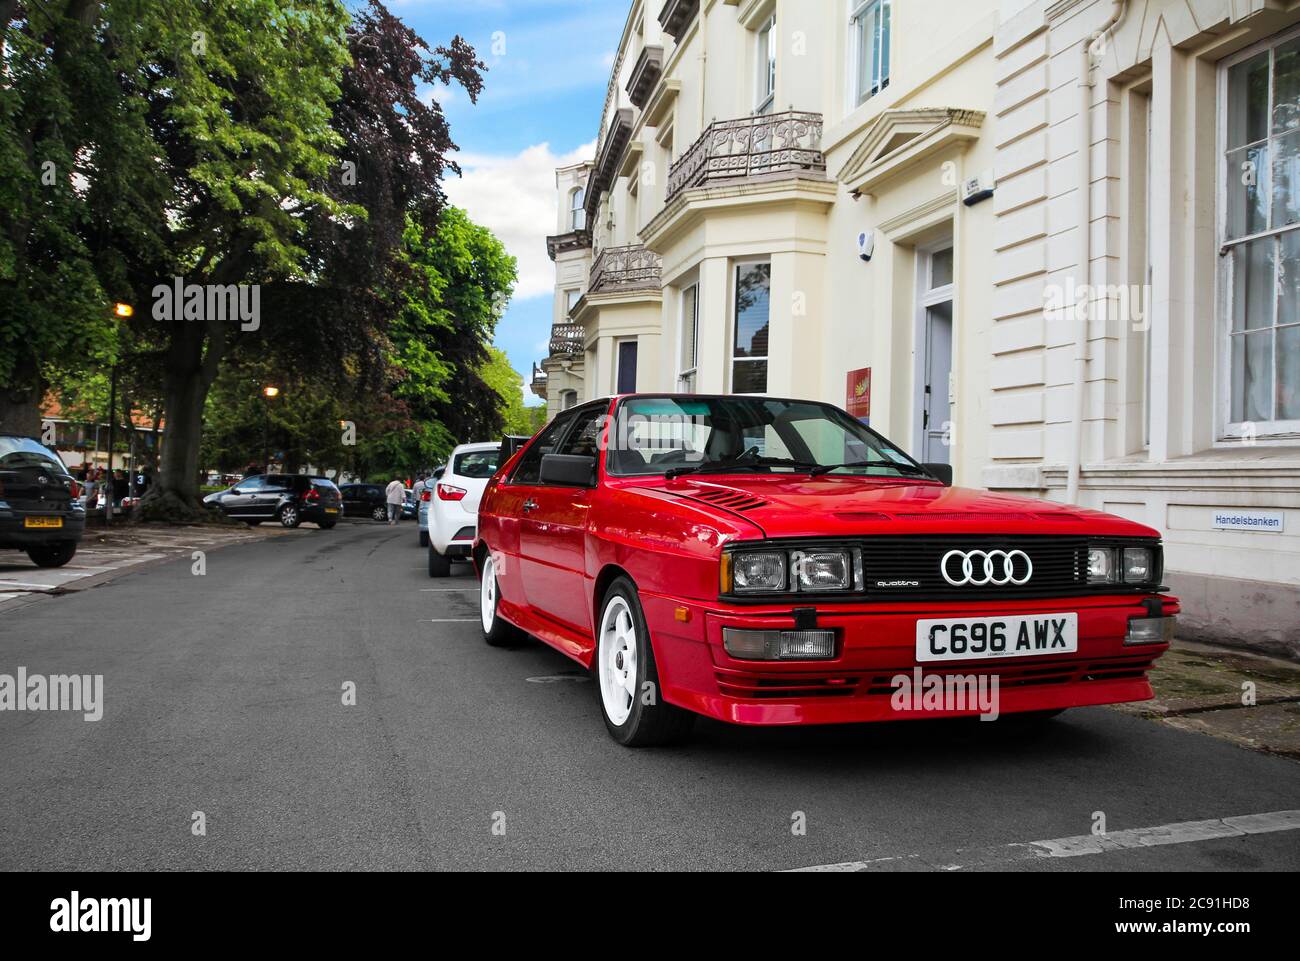 Red Audi Quattro classic sports car parked on a street in central Coventry, West  Midlands, UK Stock Photo - Alamy